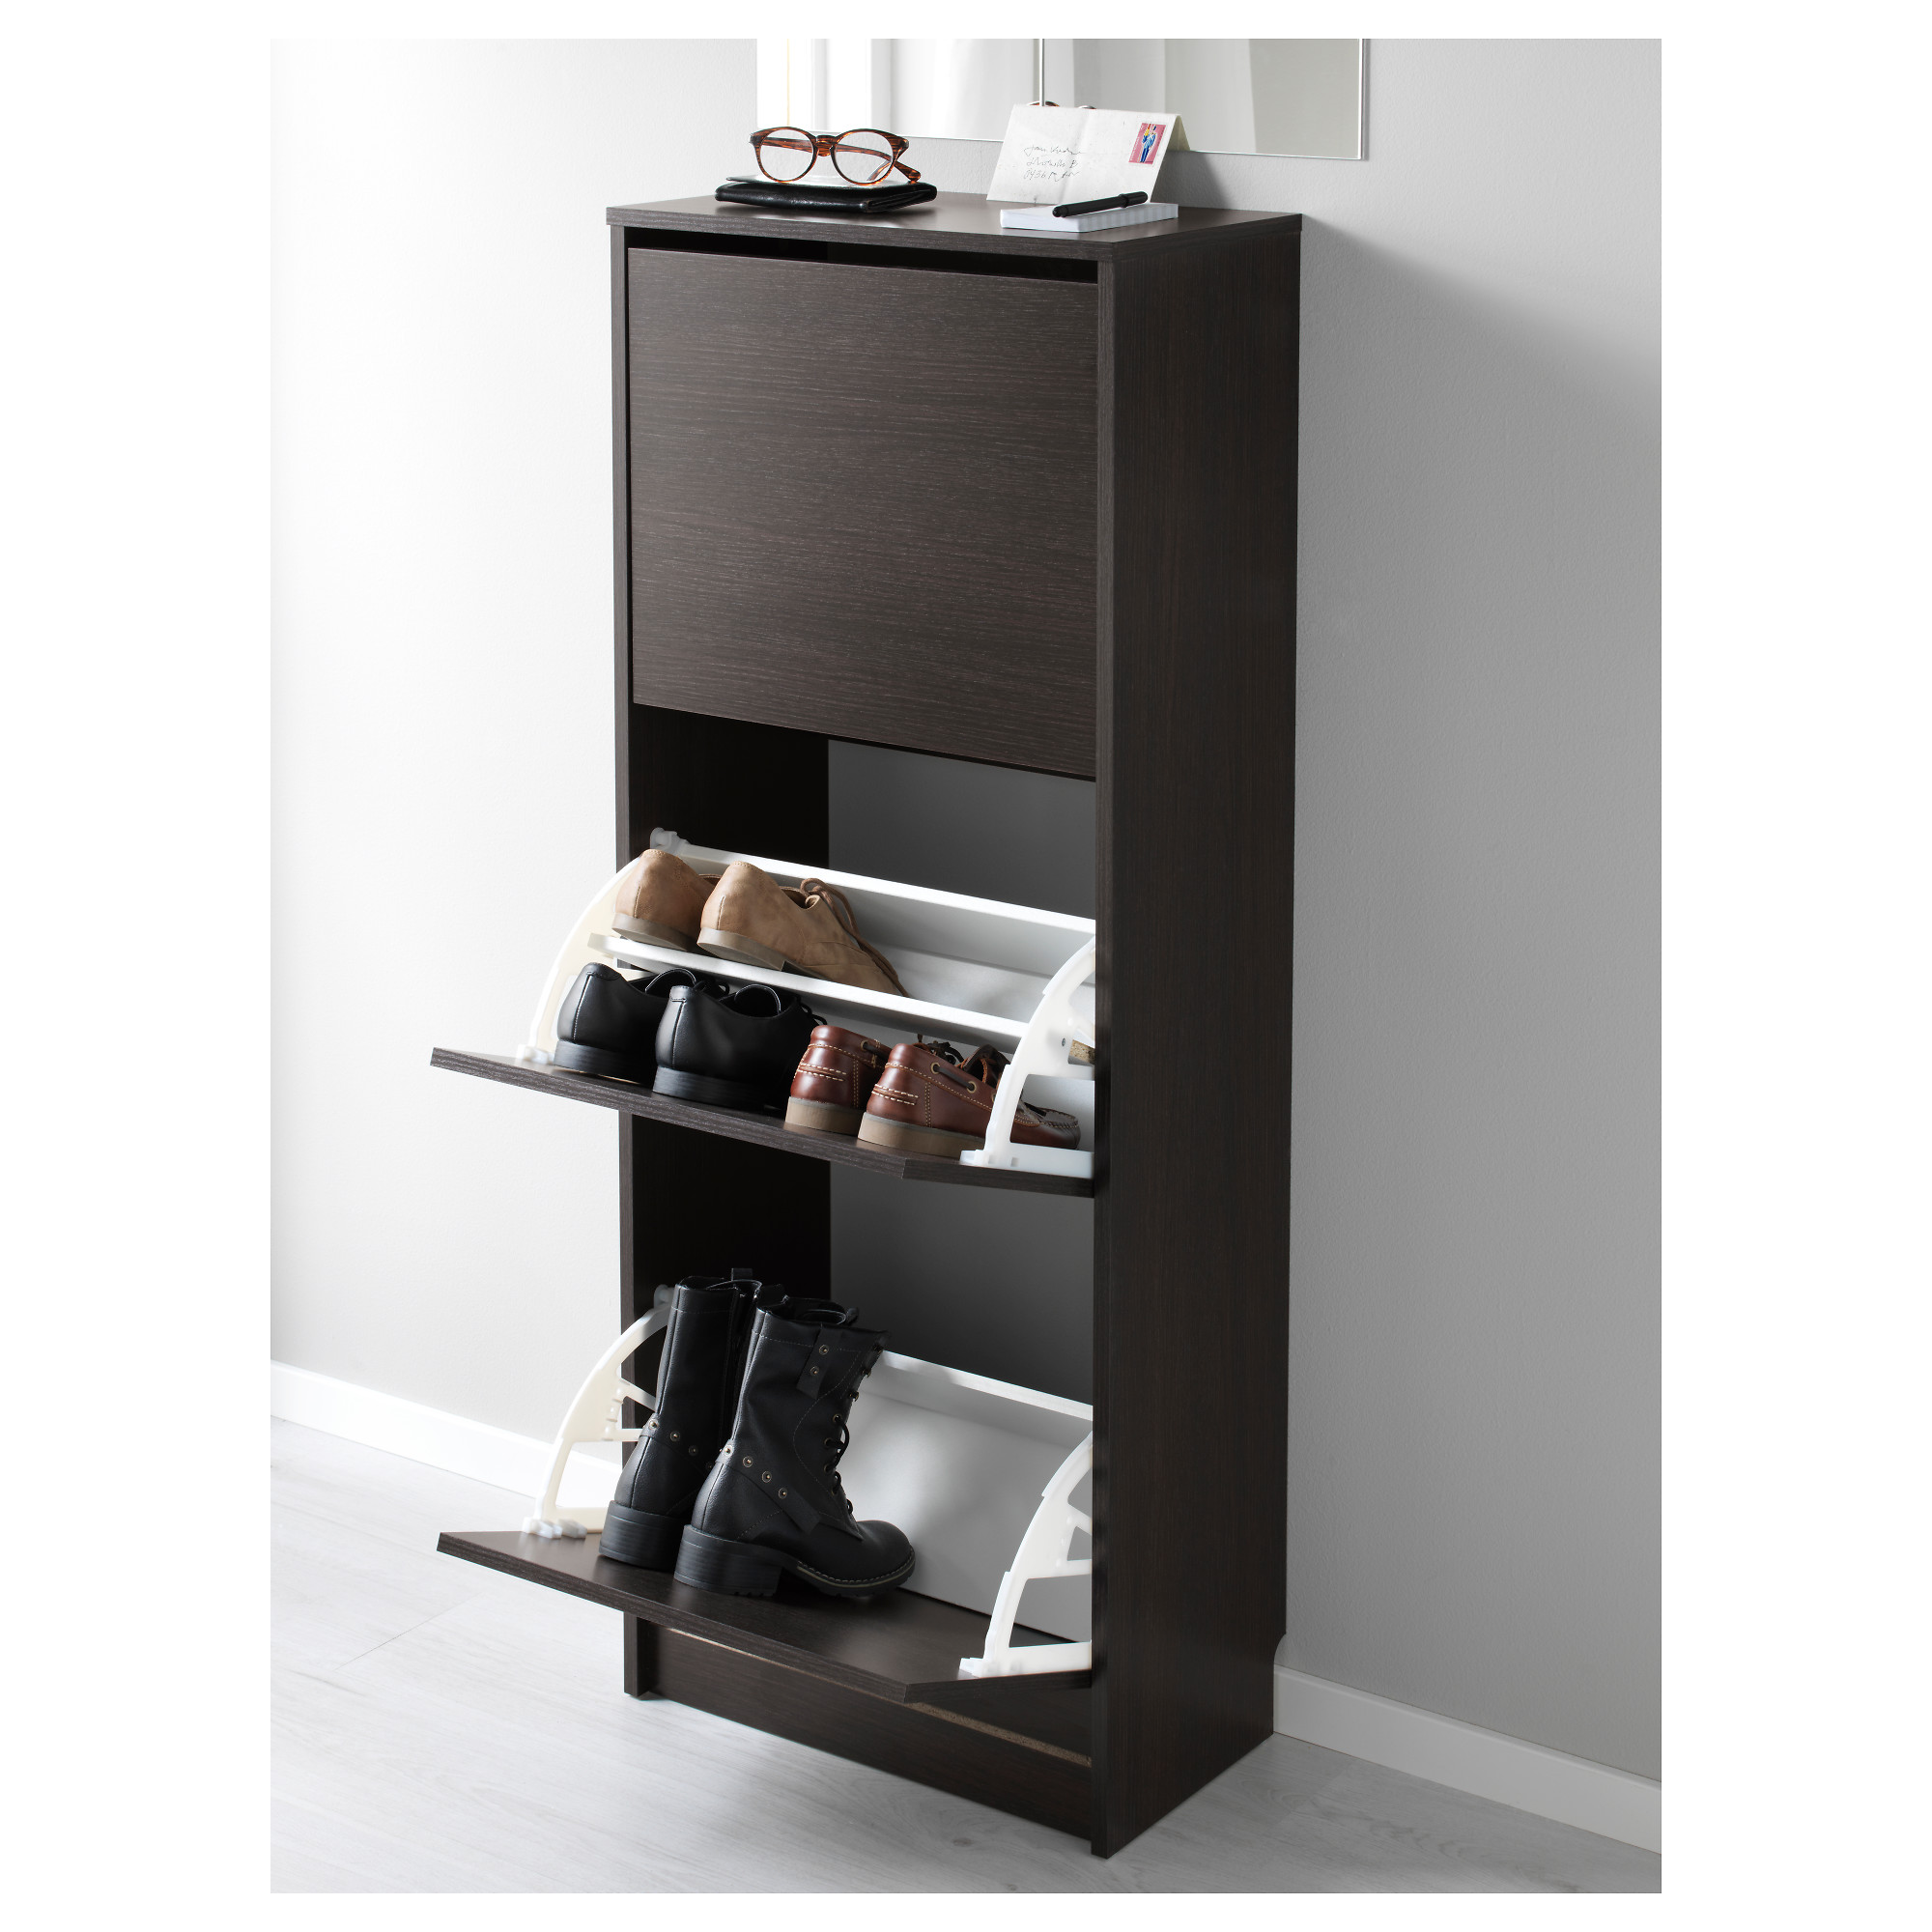 BISSA - shoe cabinet with 3 